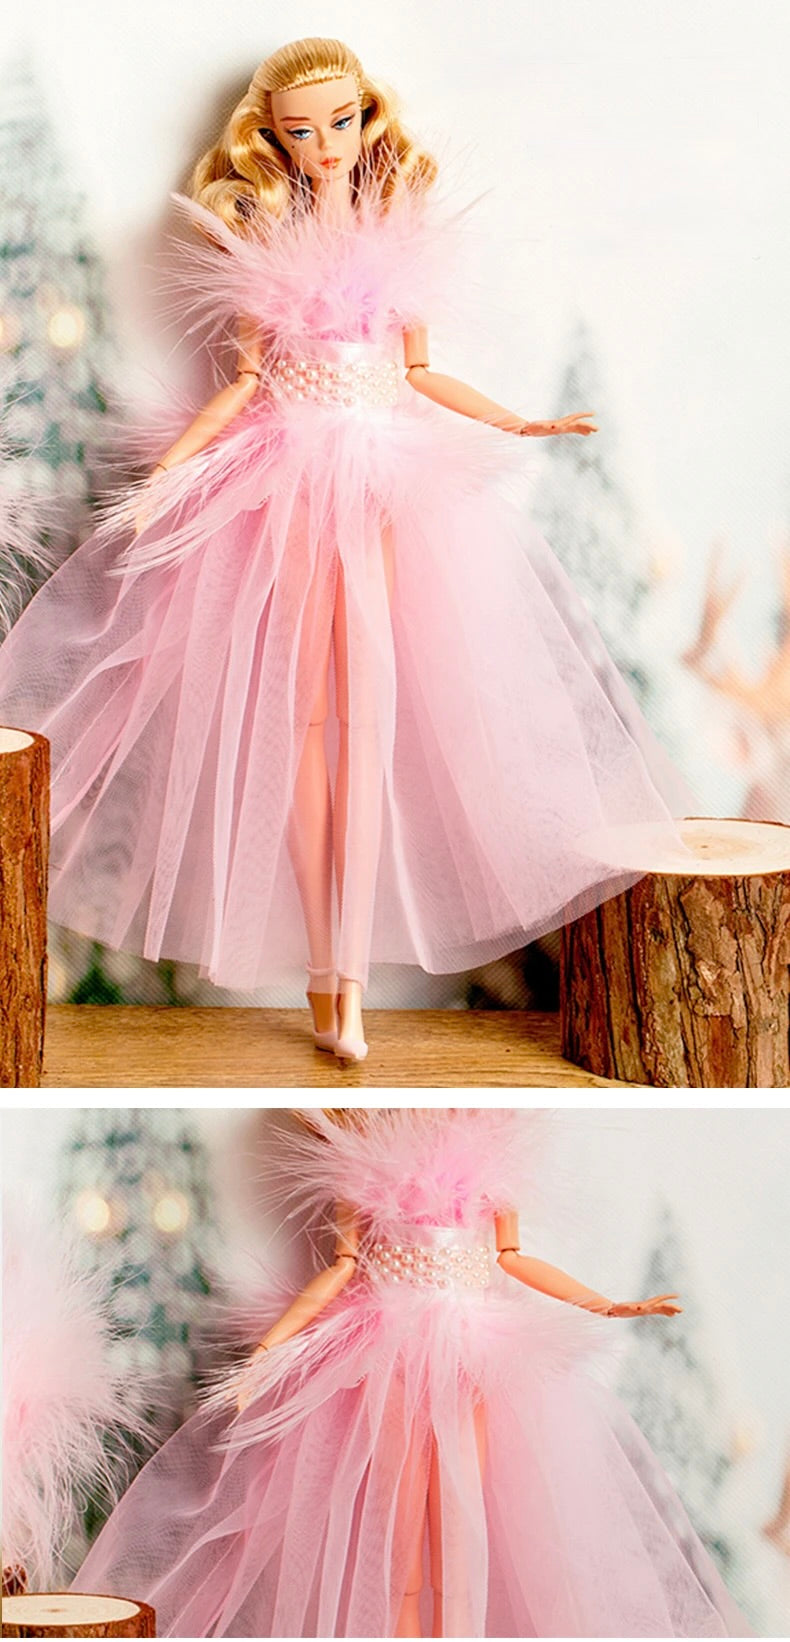 DOLLY® DOLL CLOTHES PINK FEATHER SHOWBIZ TULLE DRESS WITH PEARL BELT + SHOES FOR 12 inch 30 cm 1/6 scale fashion dolls